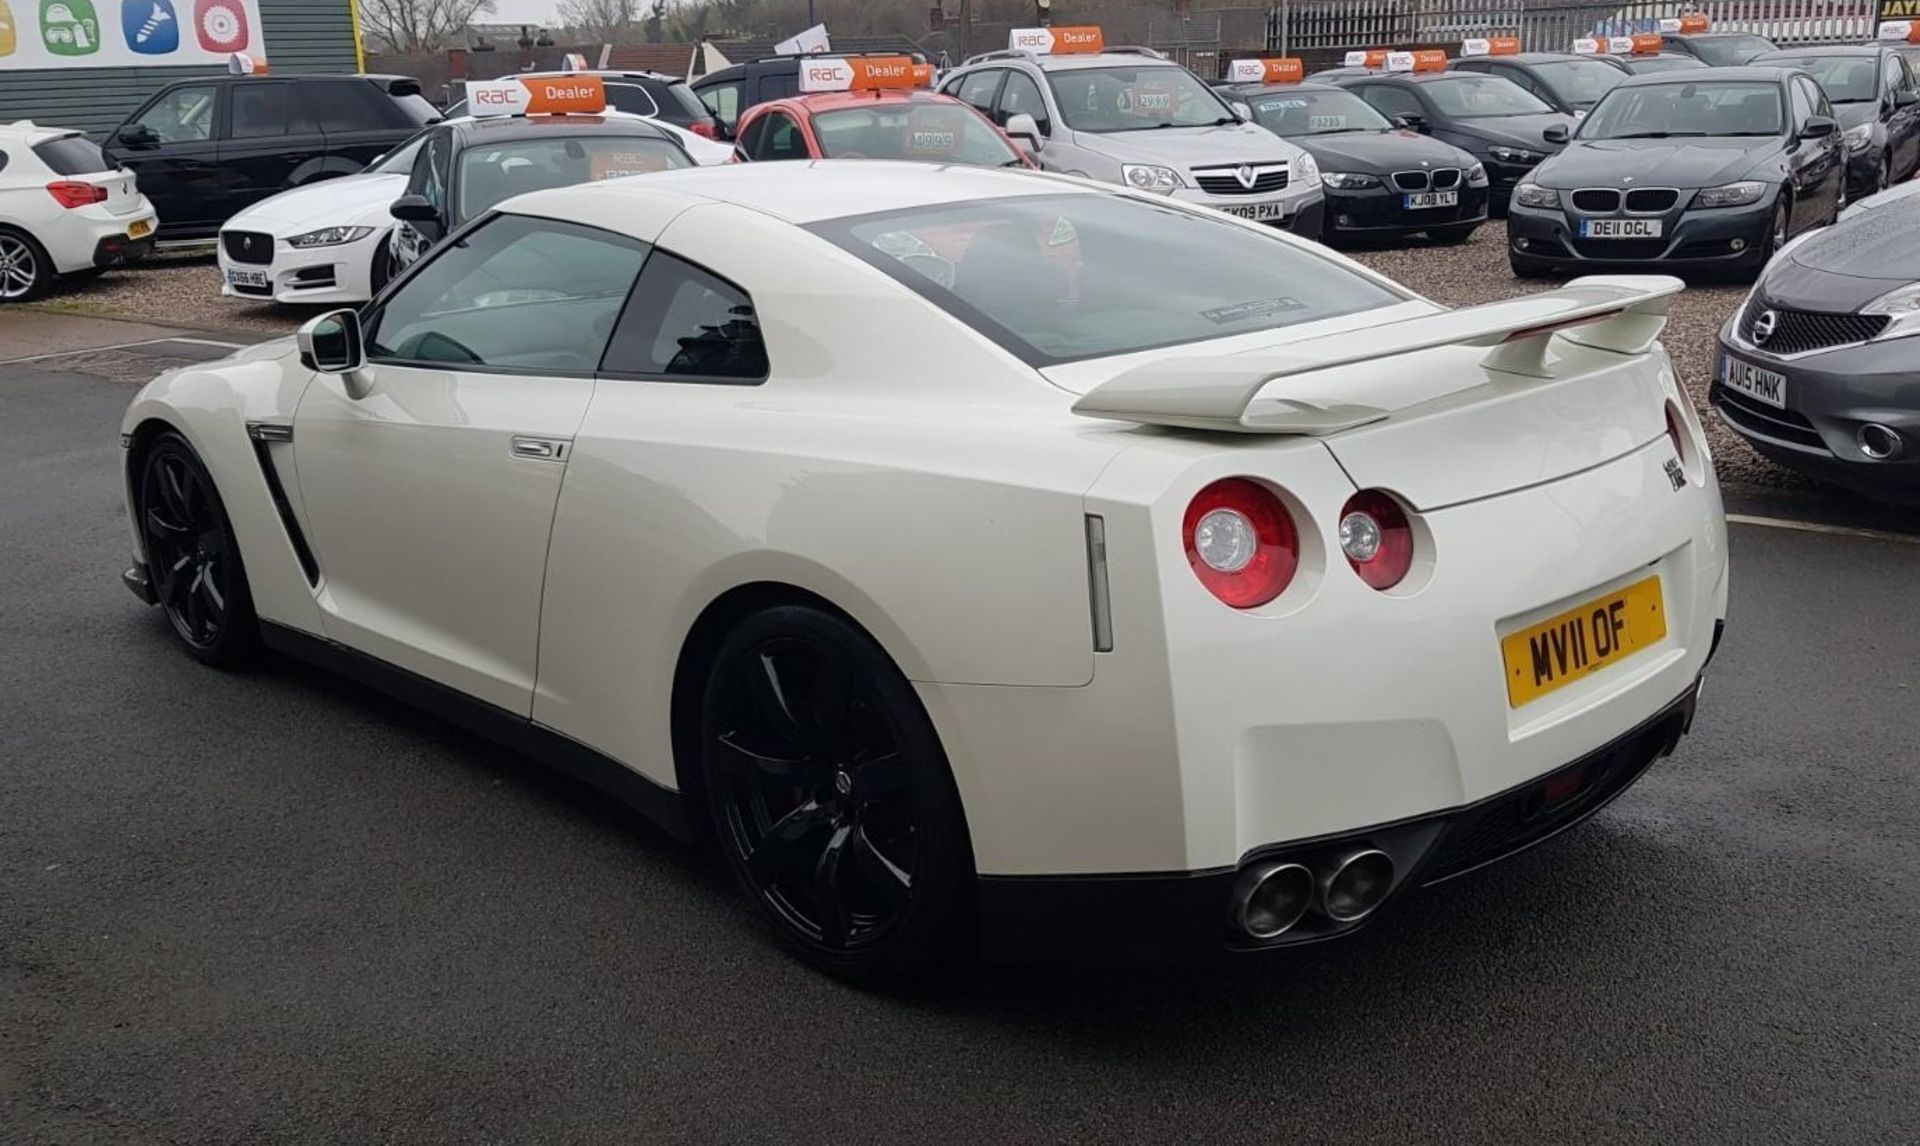 2011 NISSAN GT-R R35 750 stage 5 PREMIUM EDITION S-A 1 OWNER FROM NEW 19.5K MILES WARRANTED! no vat - Image 4 of 7